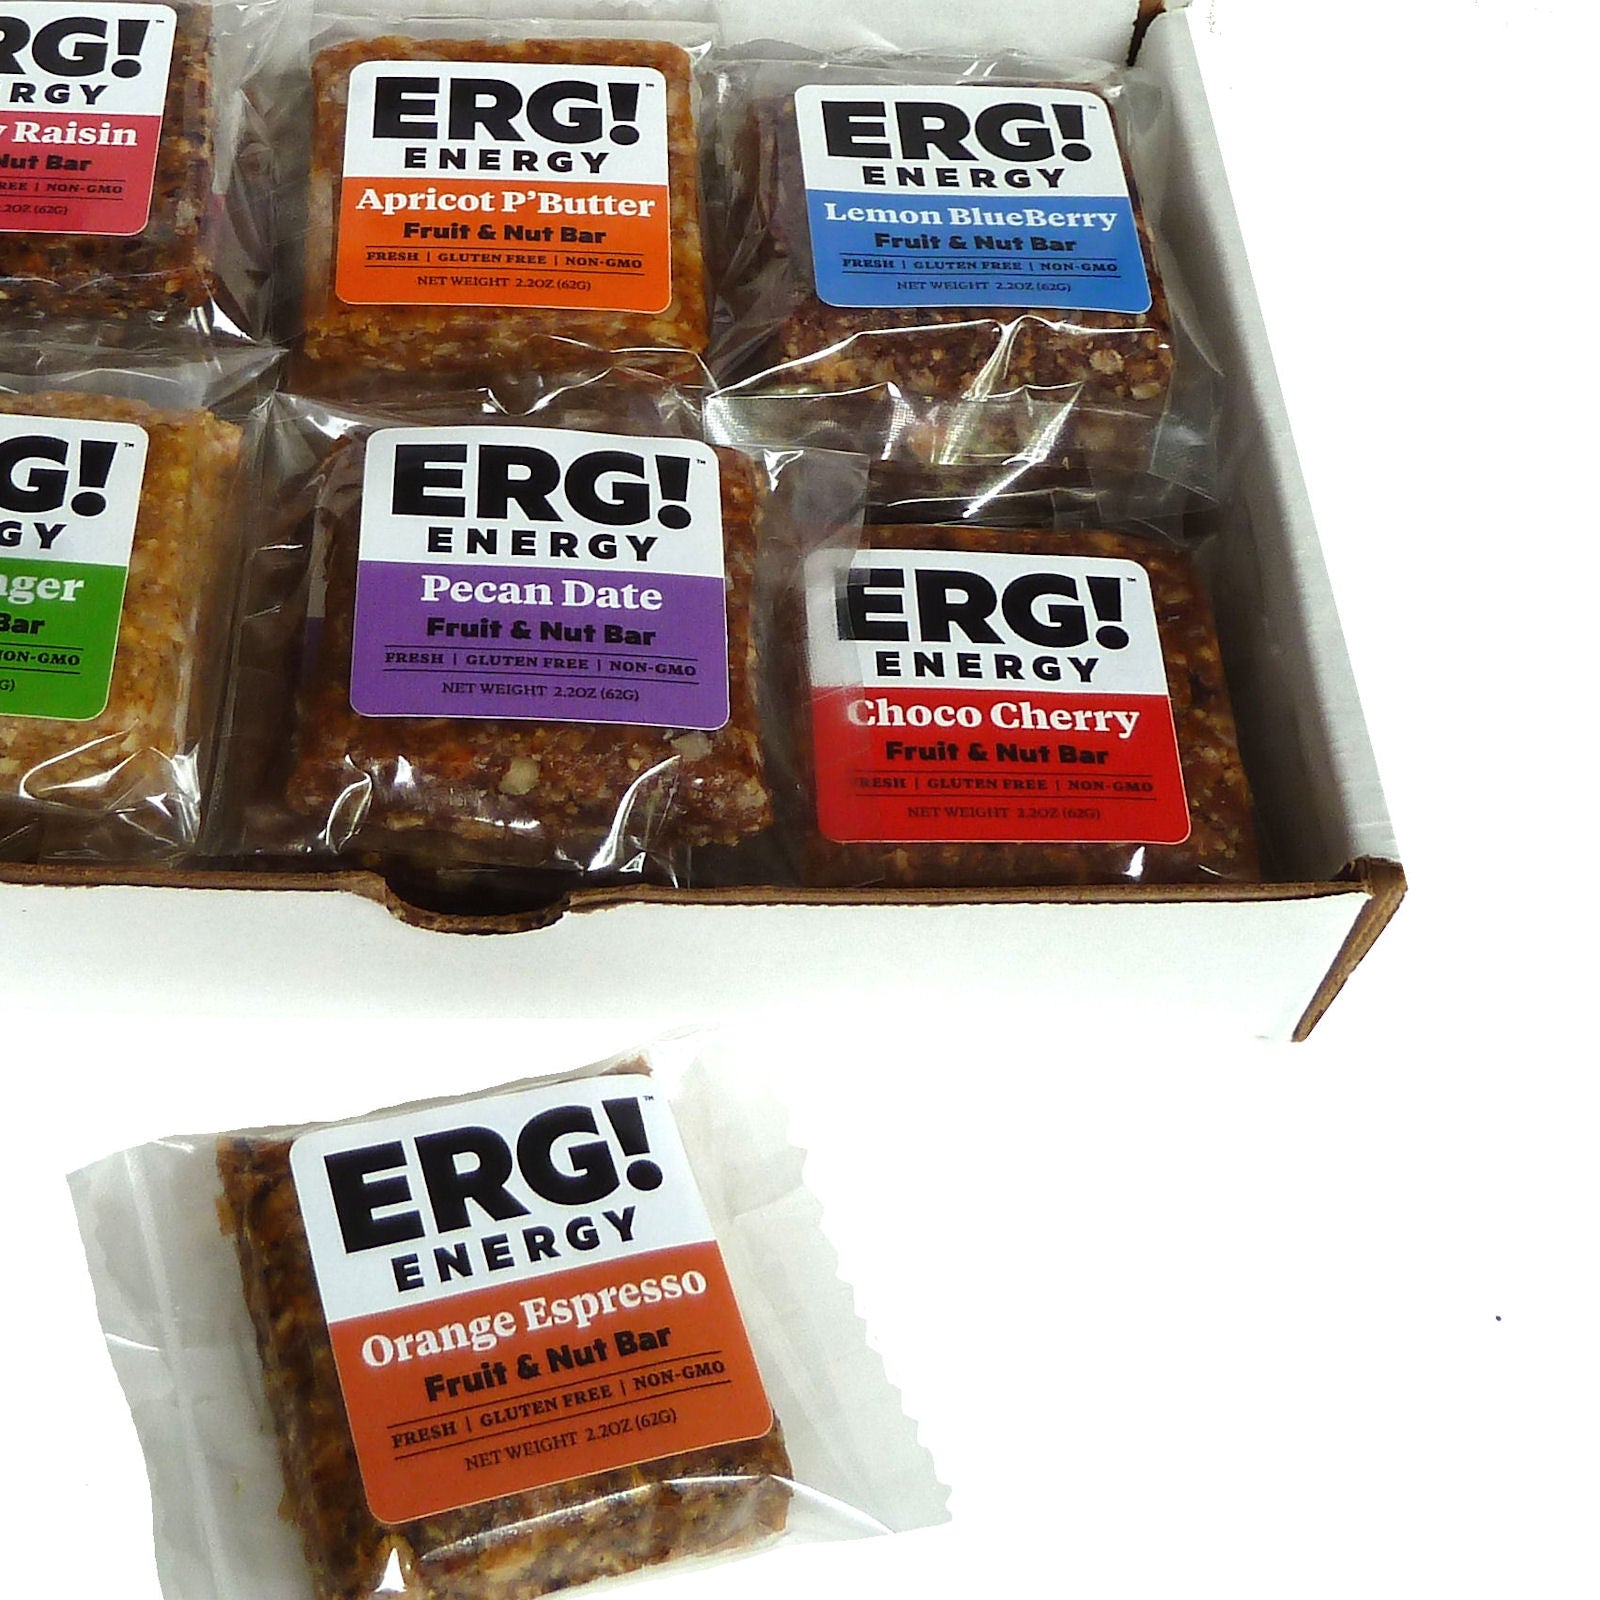 Subscription - 18 ERG! Bars Each Month for 3 Months